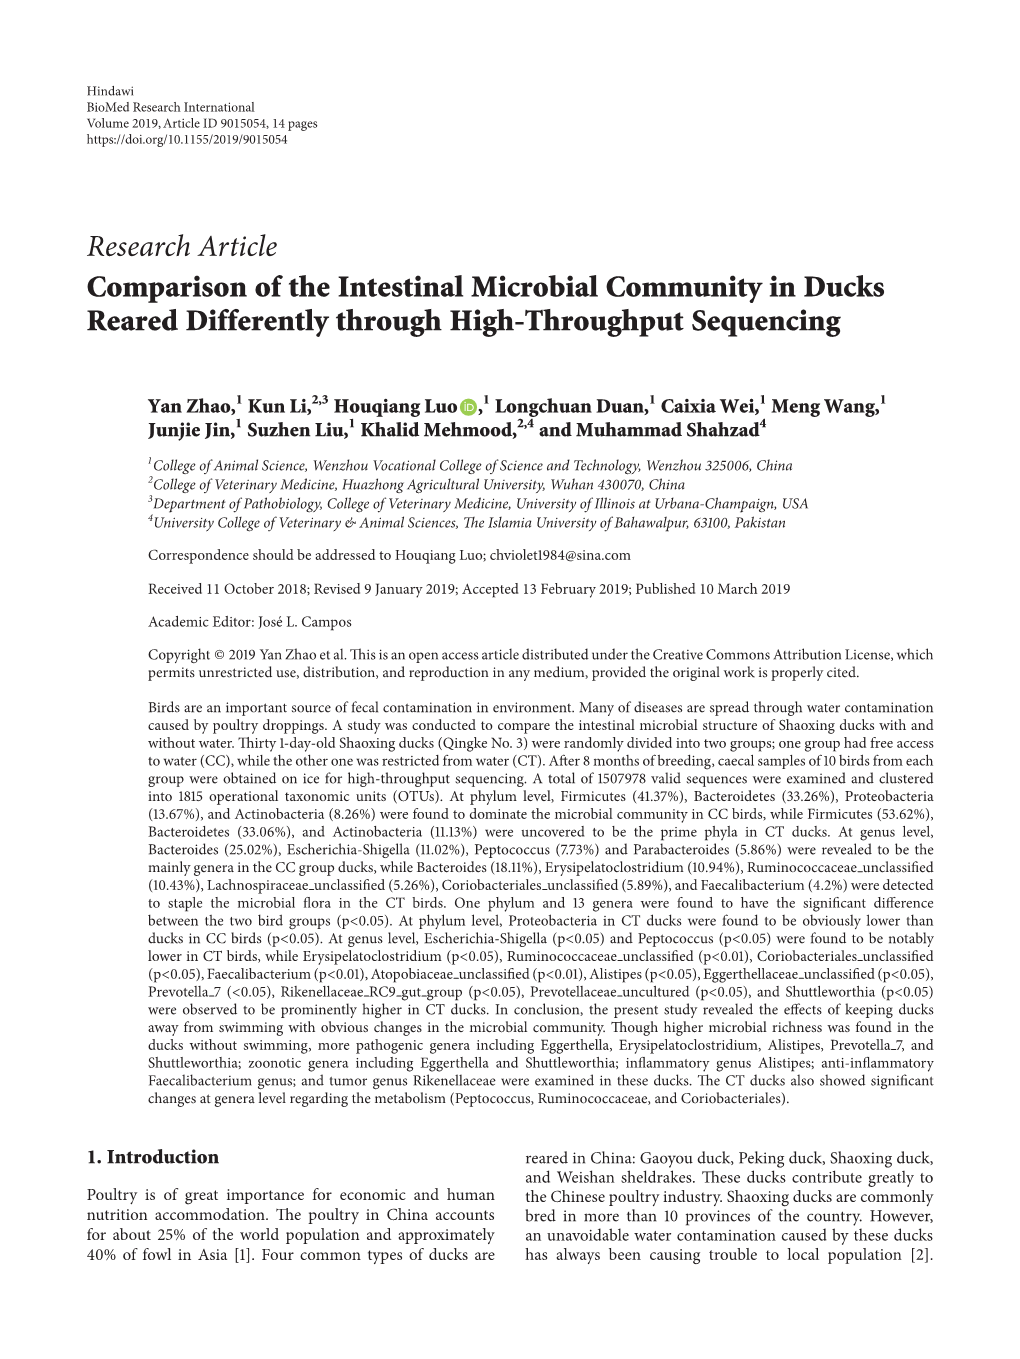 Comparison of the Intestinal Microbial Community in Ducks Reared Differently Through High-Throughput Sequencing